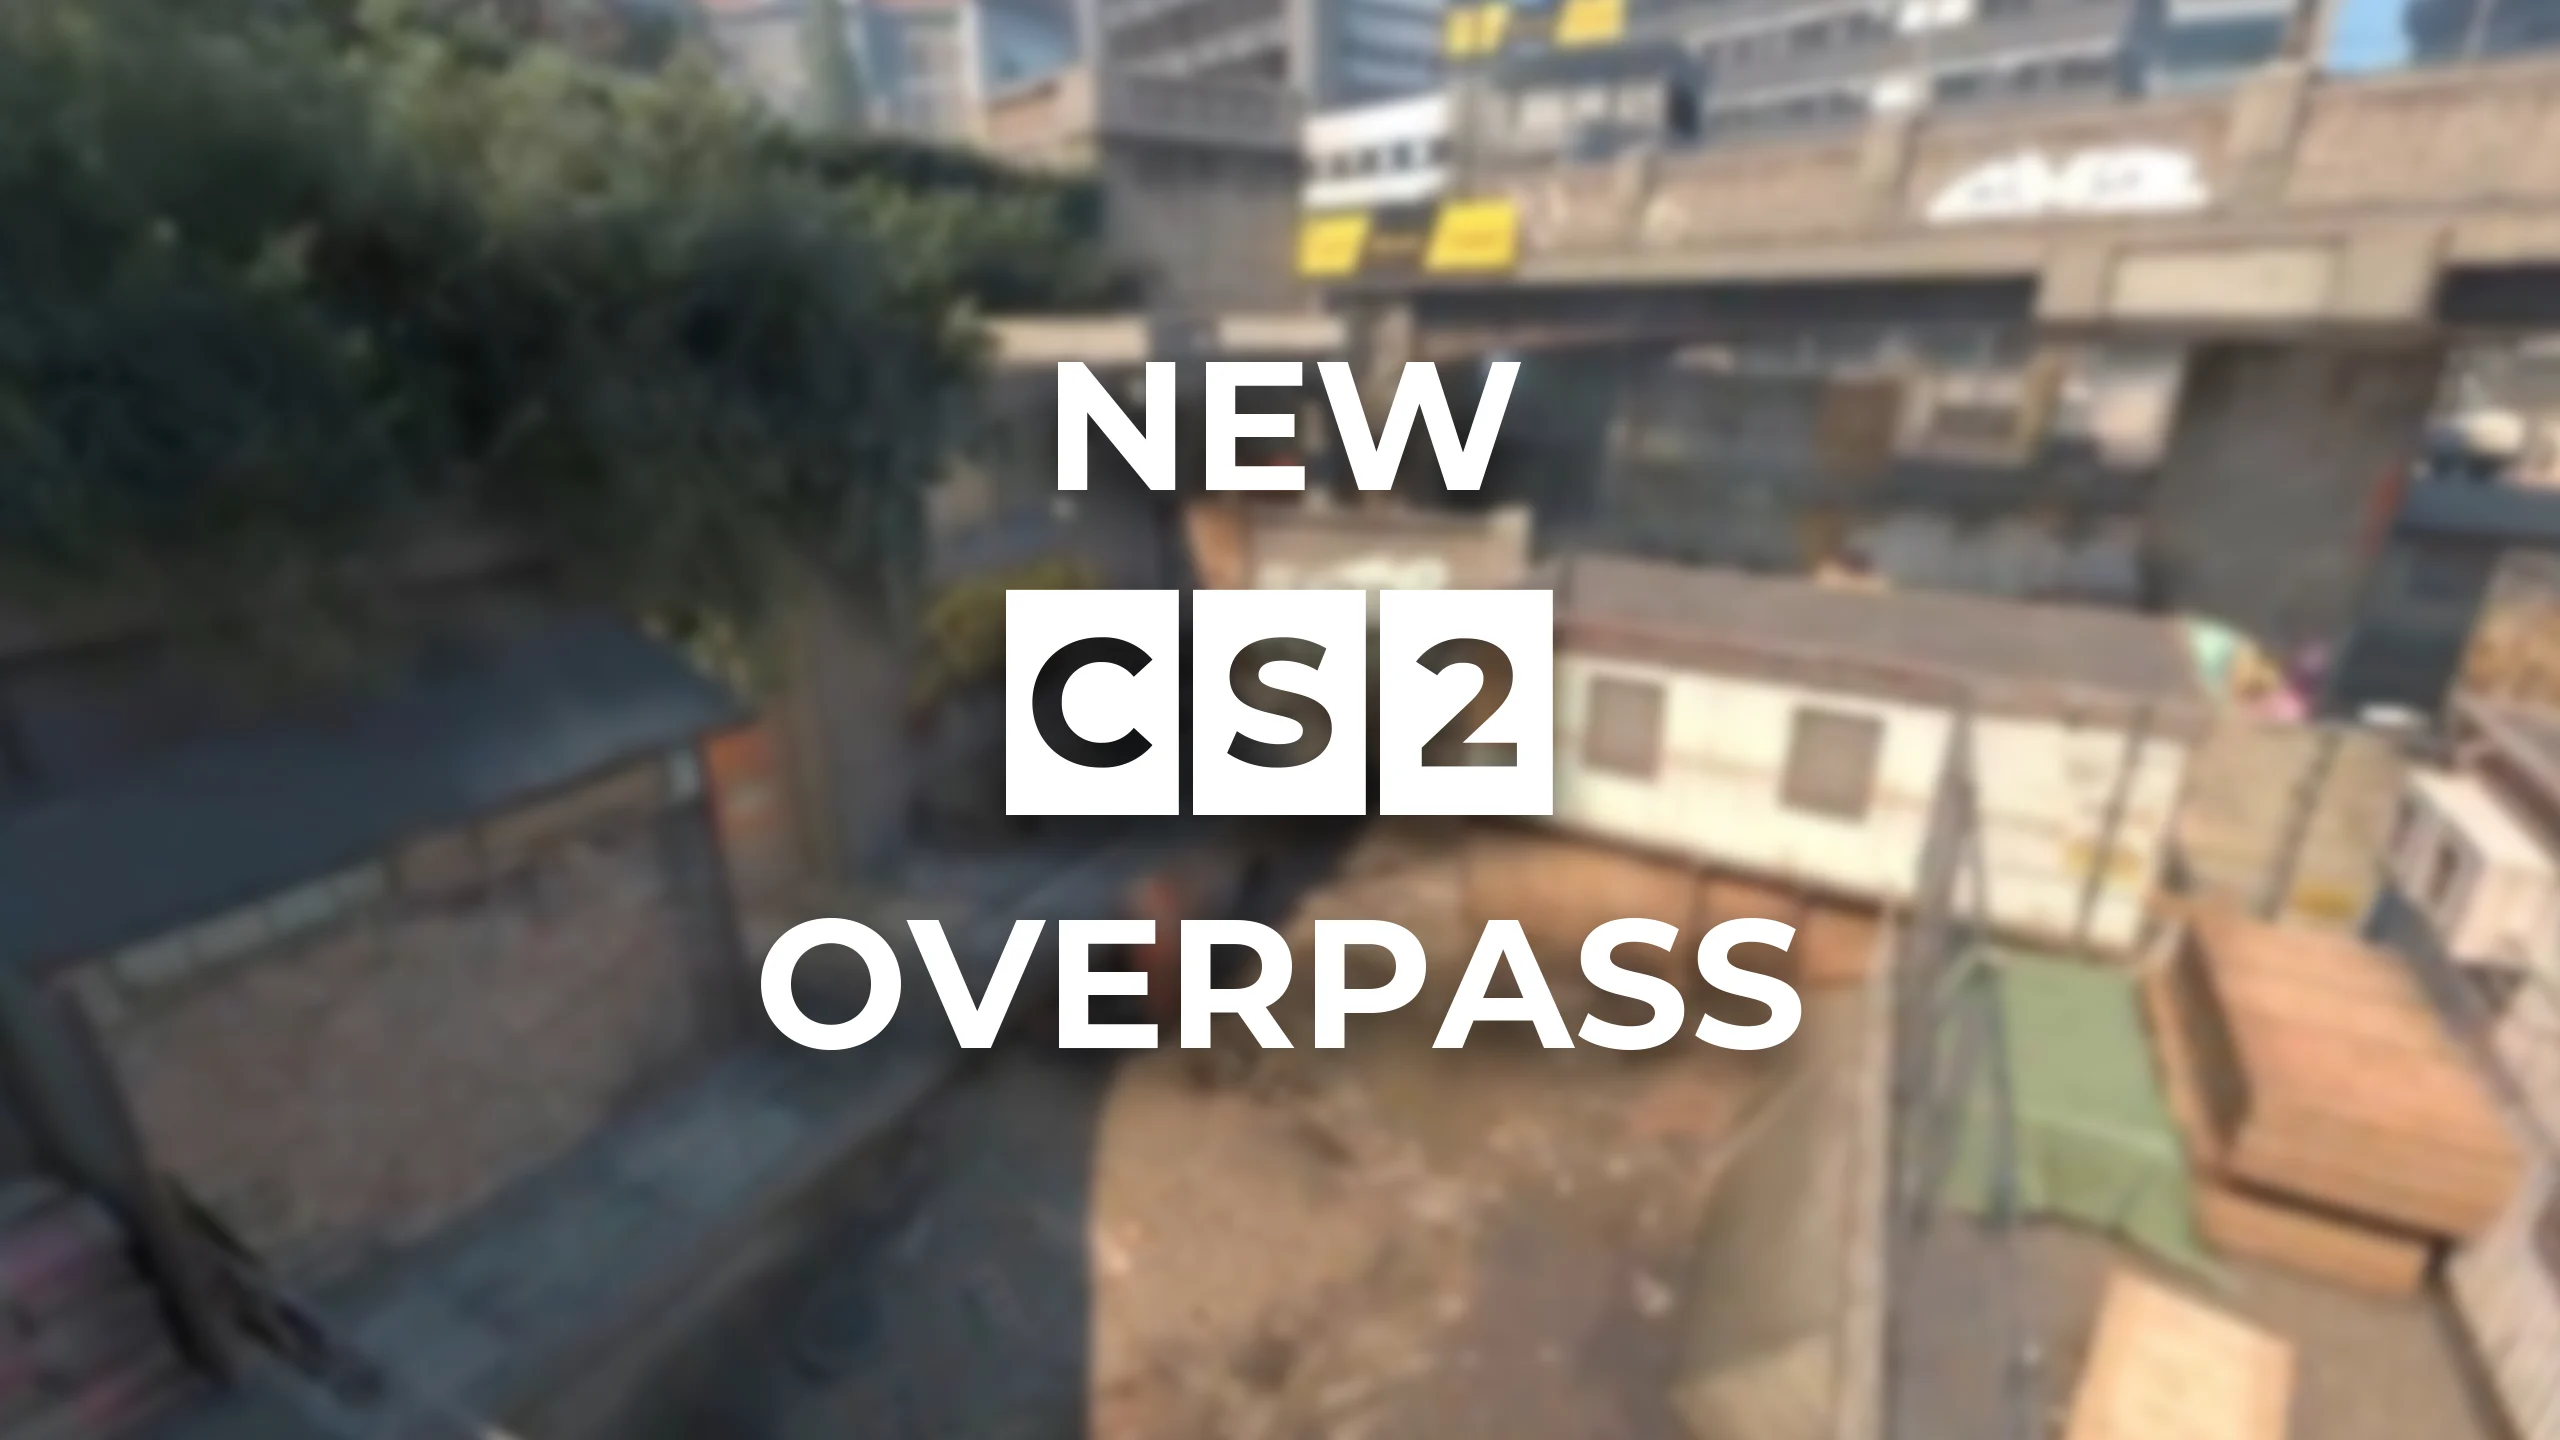 New CS2 Overpass is out!